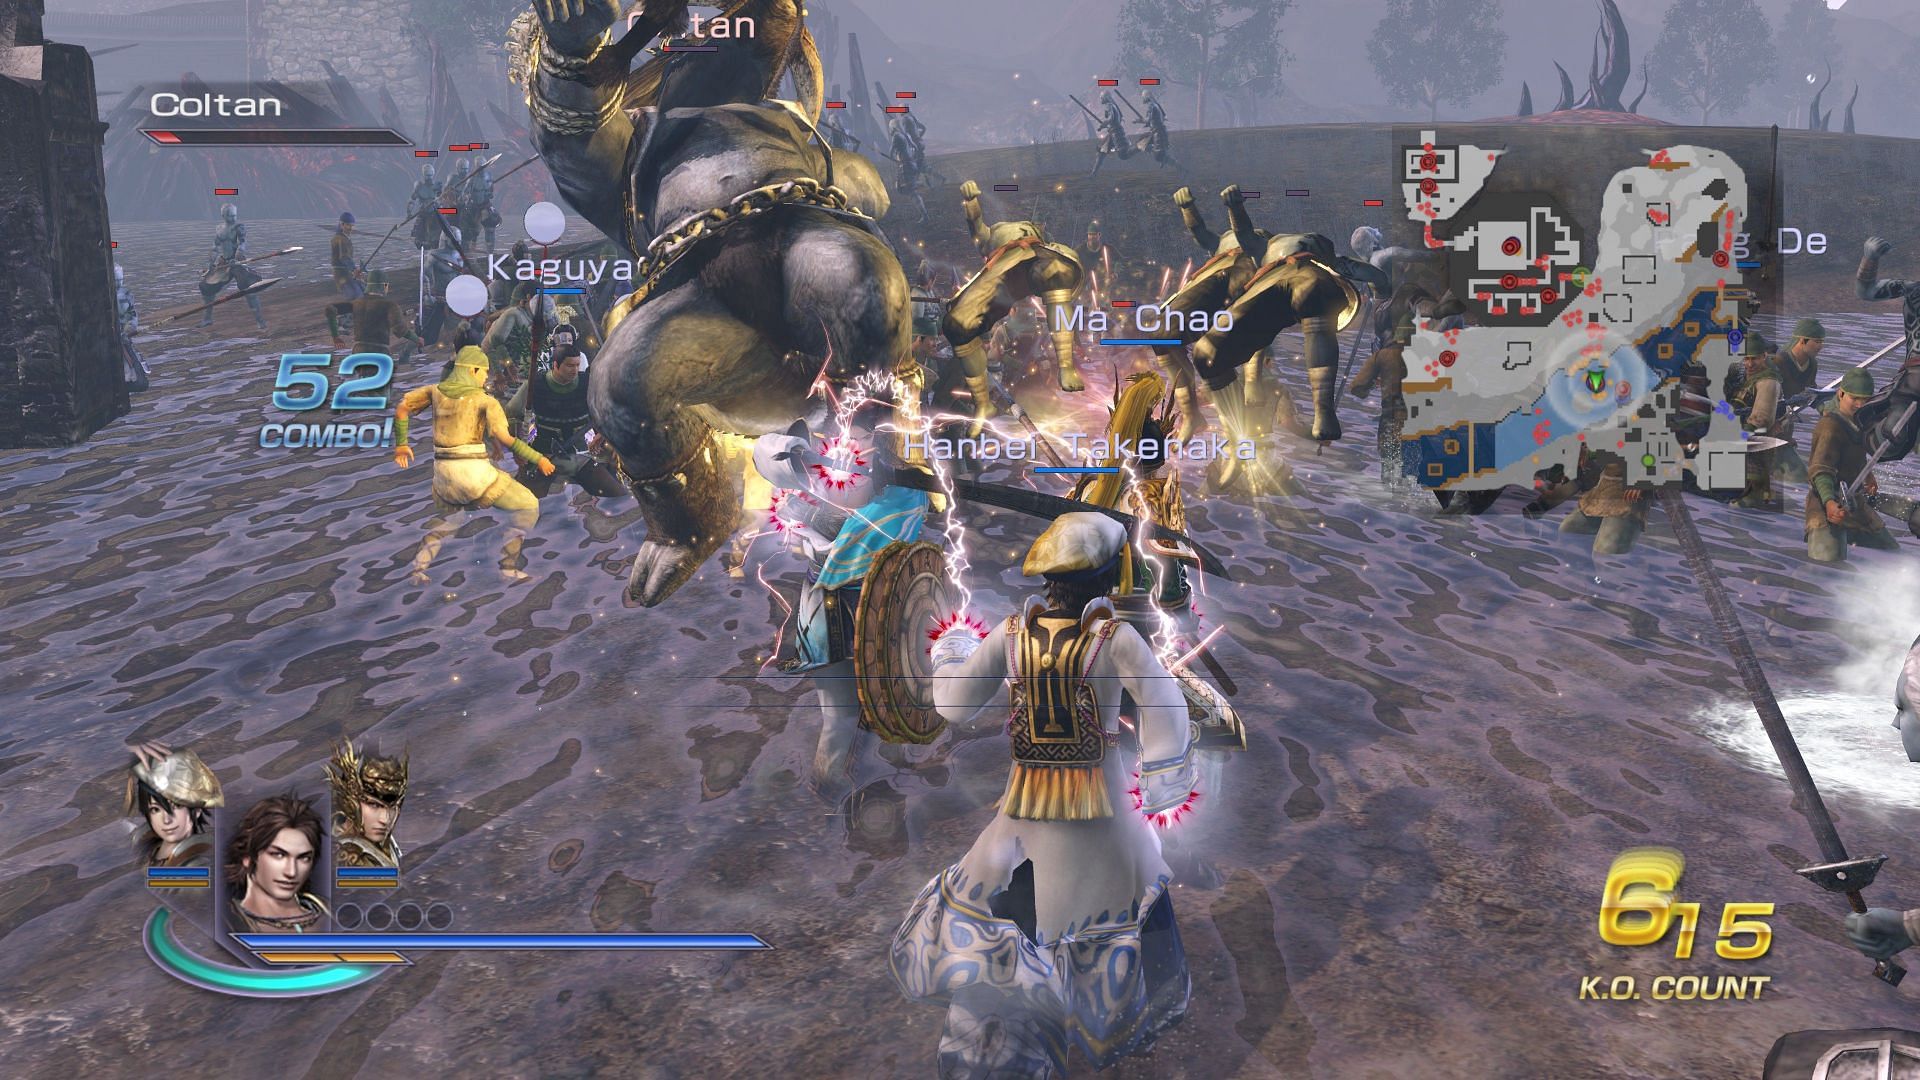 Warriors Orochi 3 Ultimate Definitive Edition has a fair price and tons of content to explore (Image via Koei Tecmo)